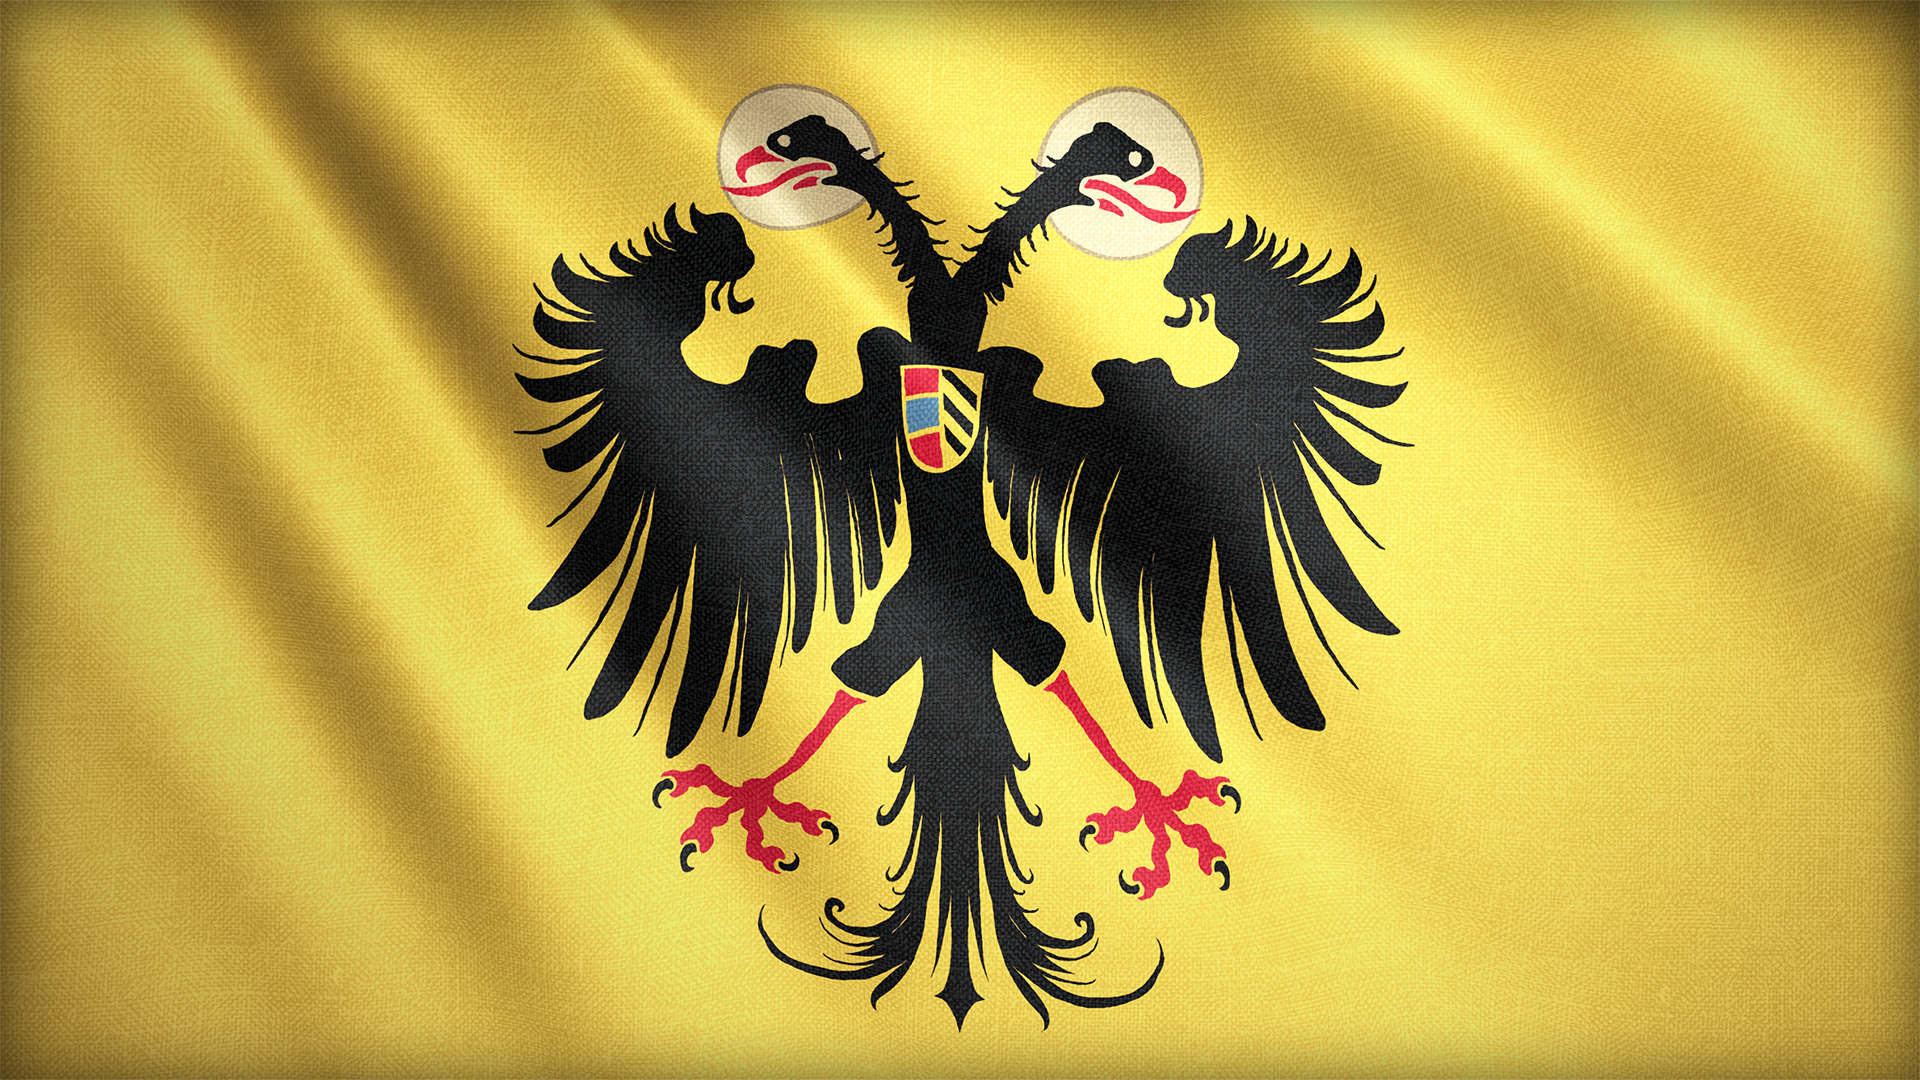 Holy Roman Empire Wallpapers